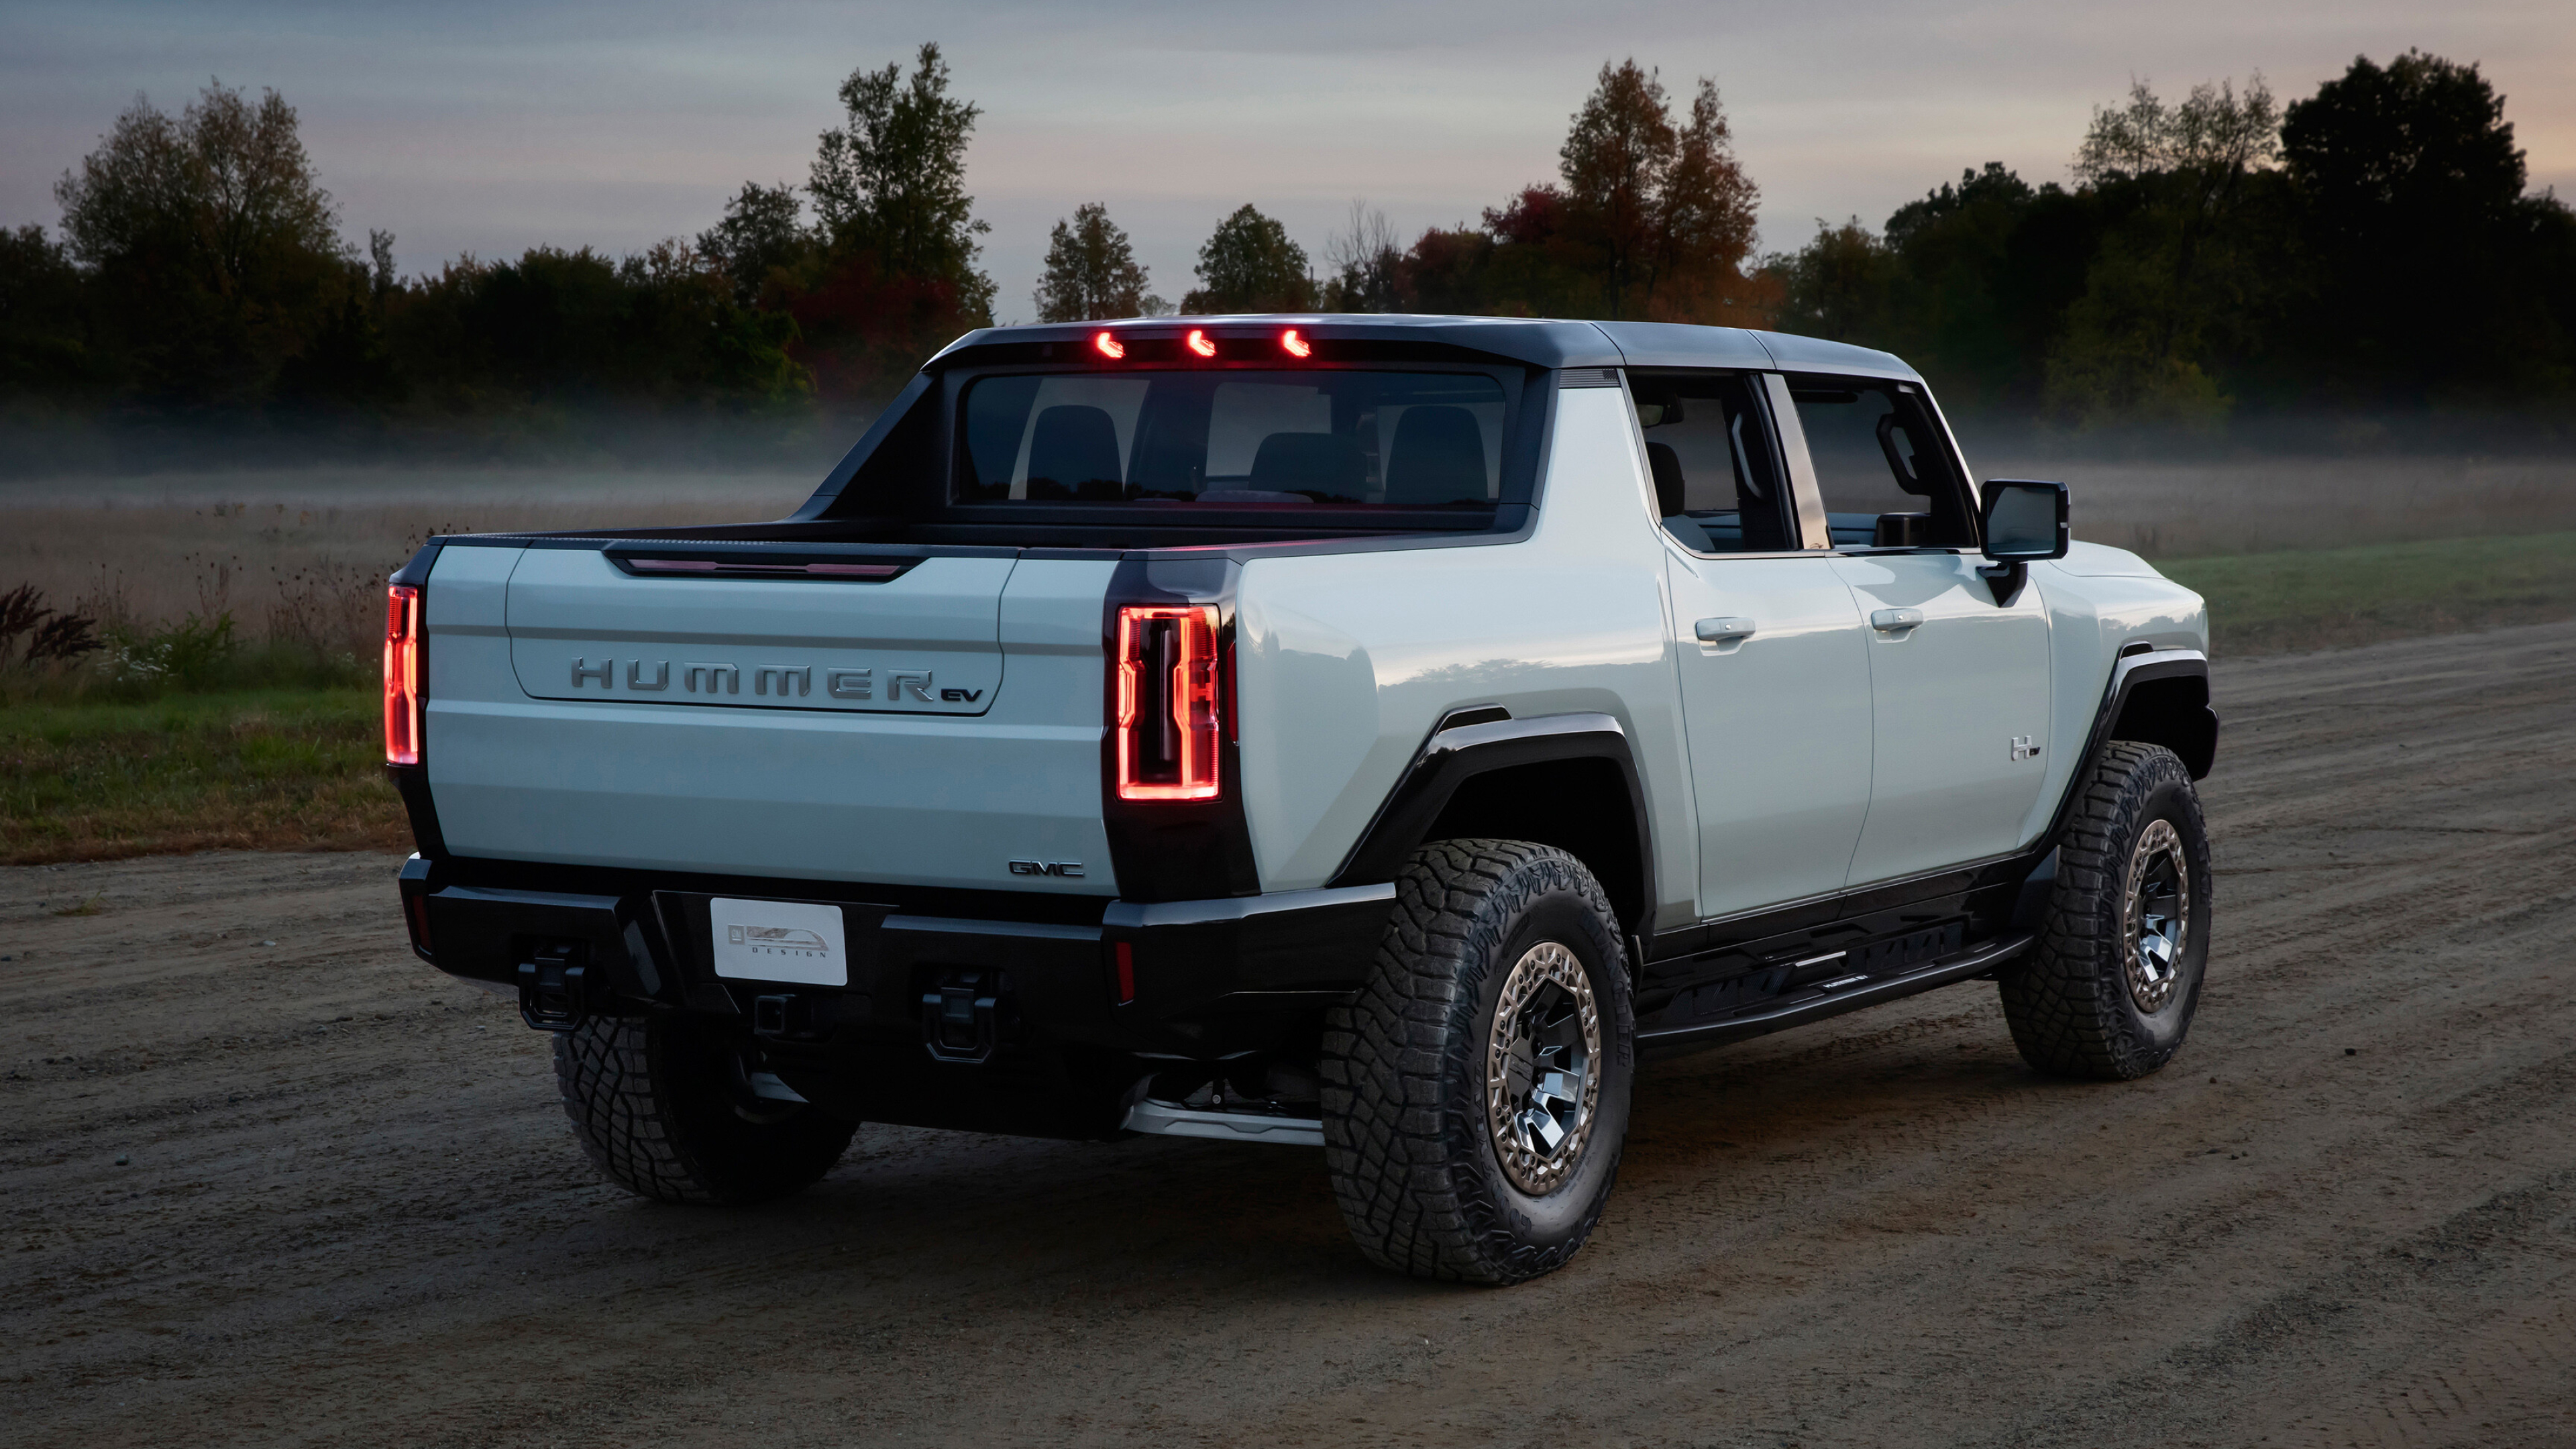 Hummer: GMC EV Edition 1, Produced by General Motors under the GMC marque. 3840x2160 4K Wallpaper.